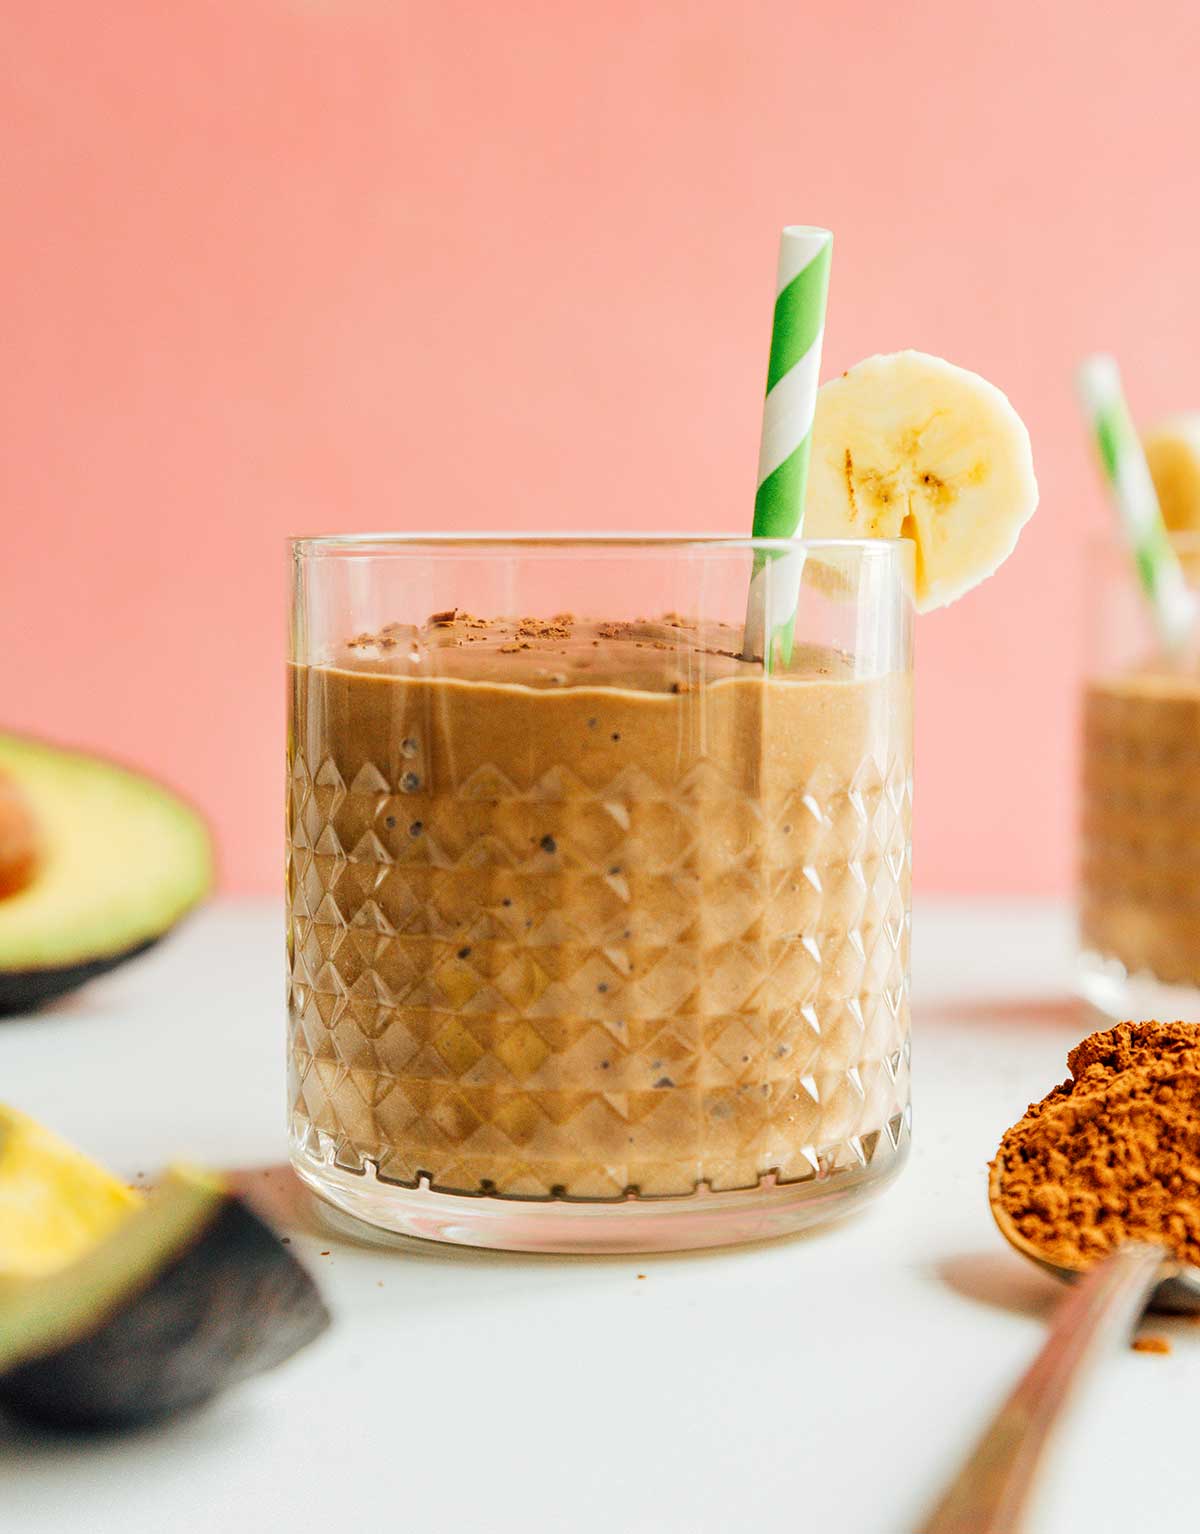 A glass filled with chocolate avocado smoothie and topped with a banana slice, cinnamon, and a green and white striped straw